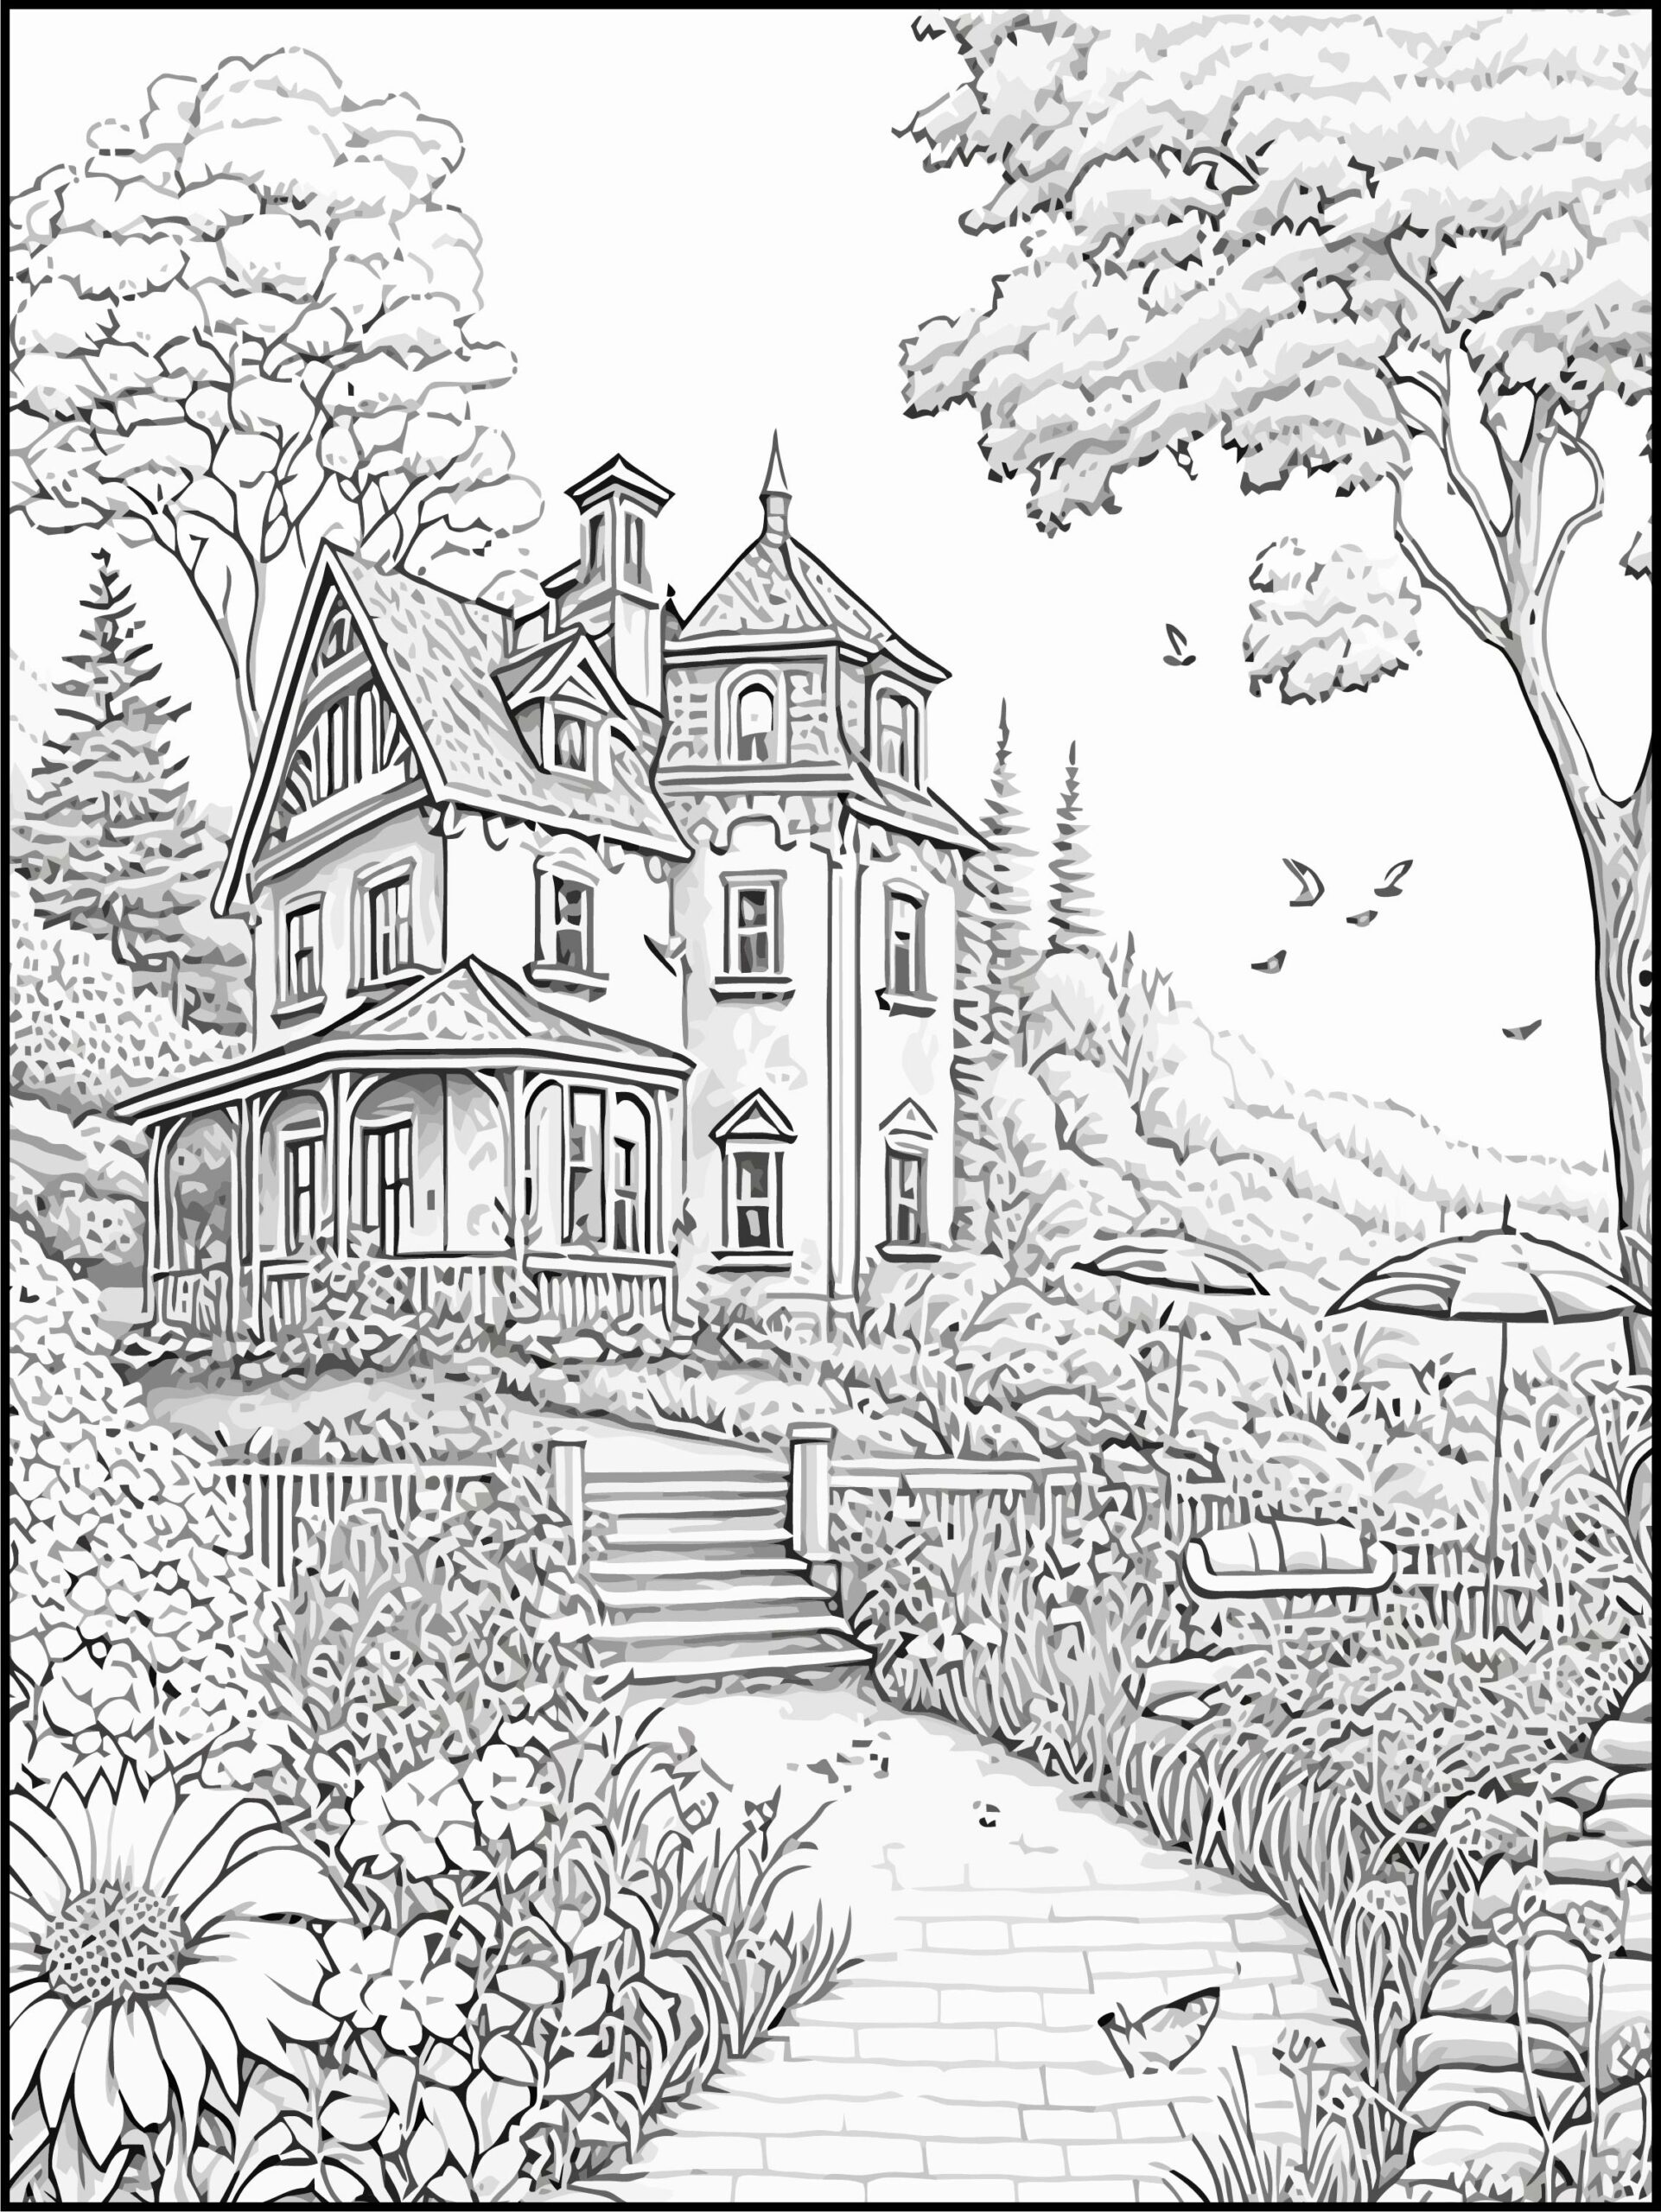 Discover the magic of the village a charming coloring book made by teachers